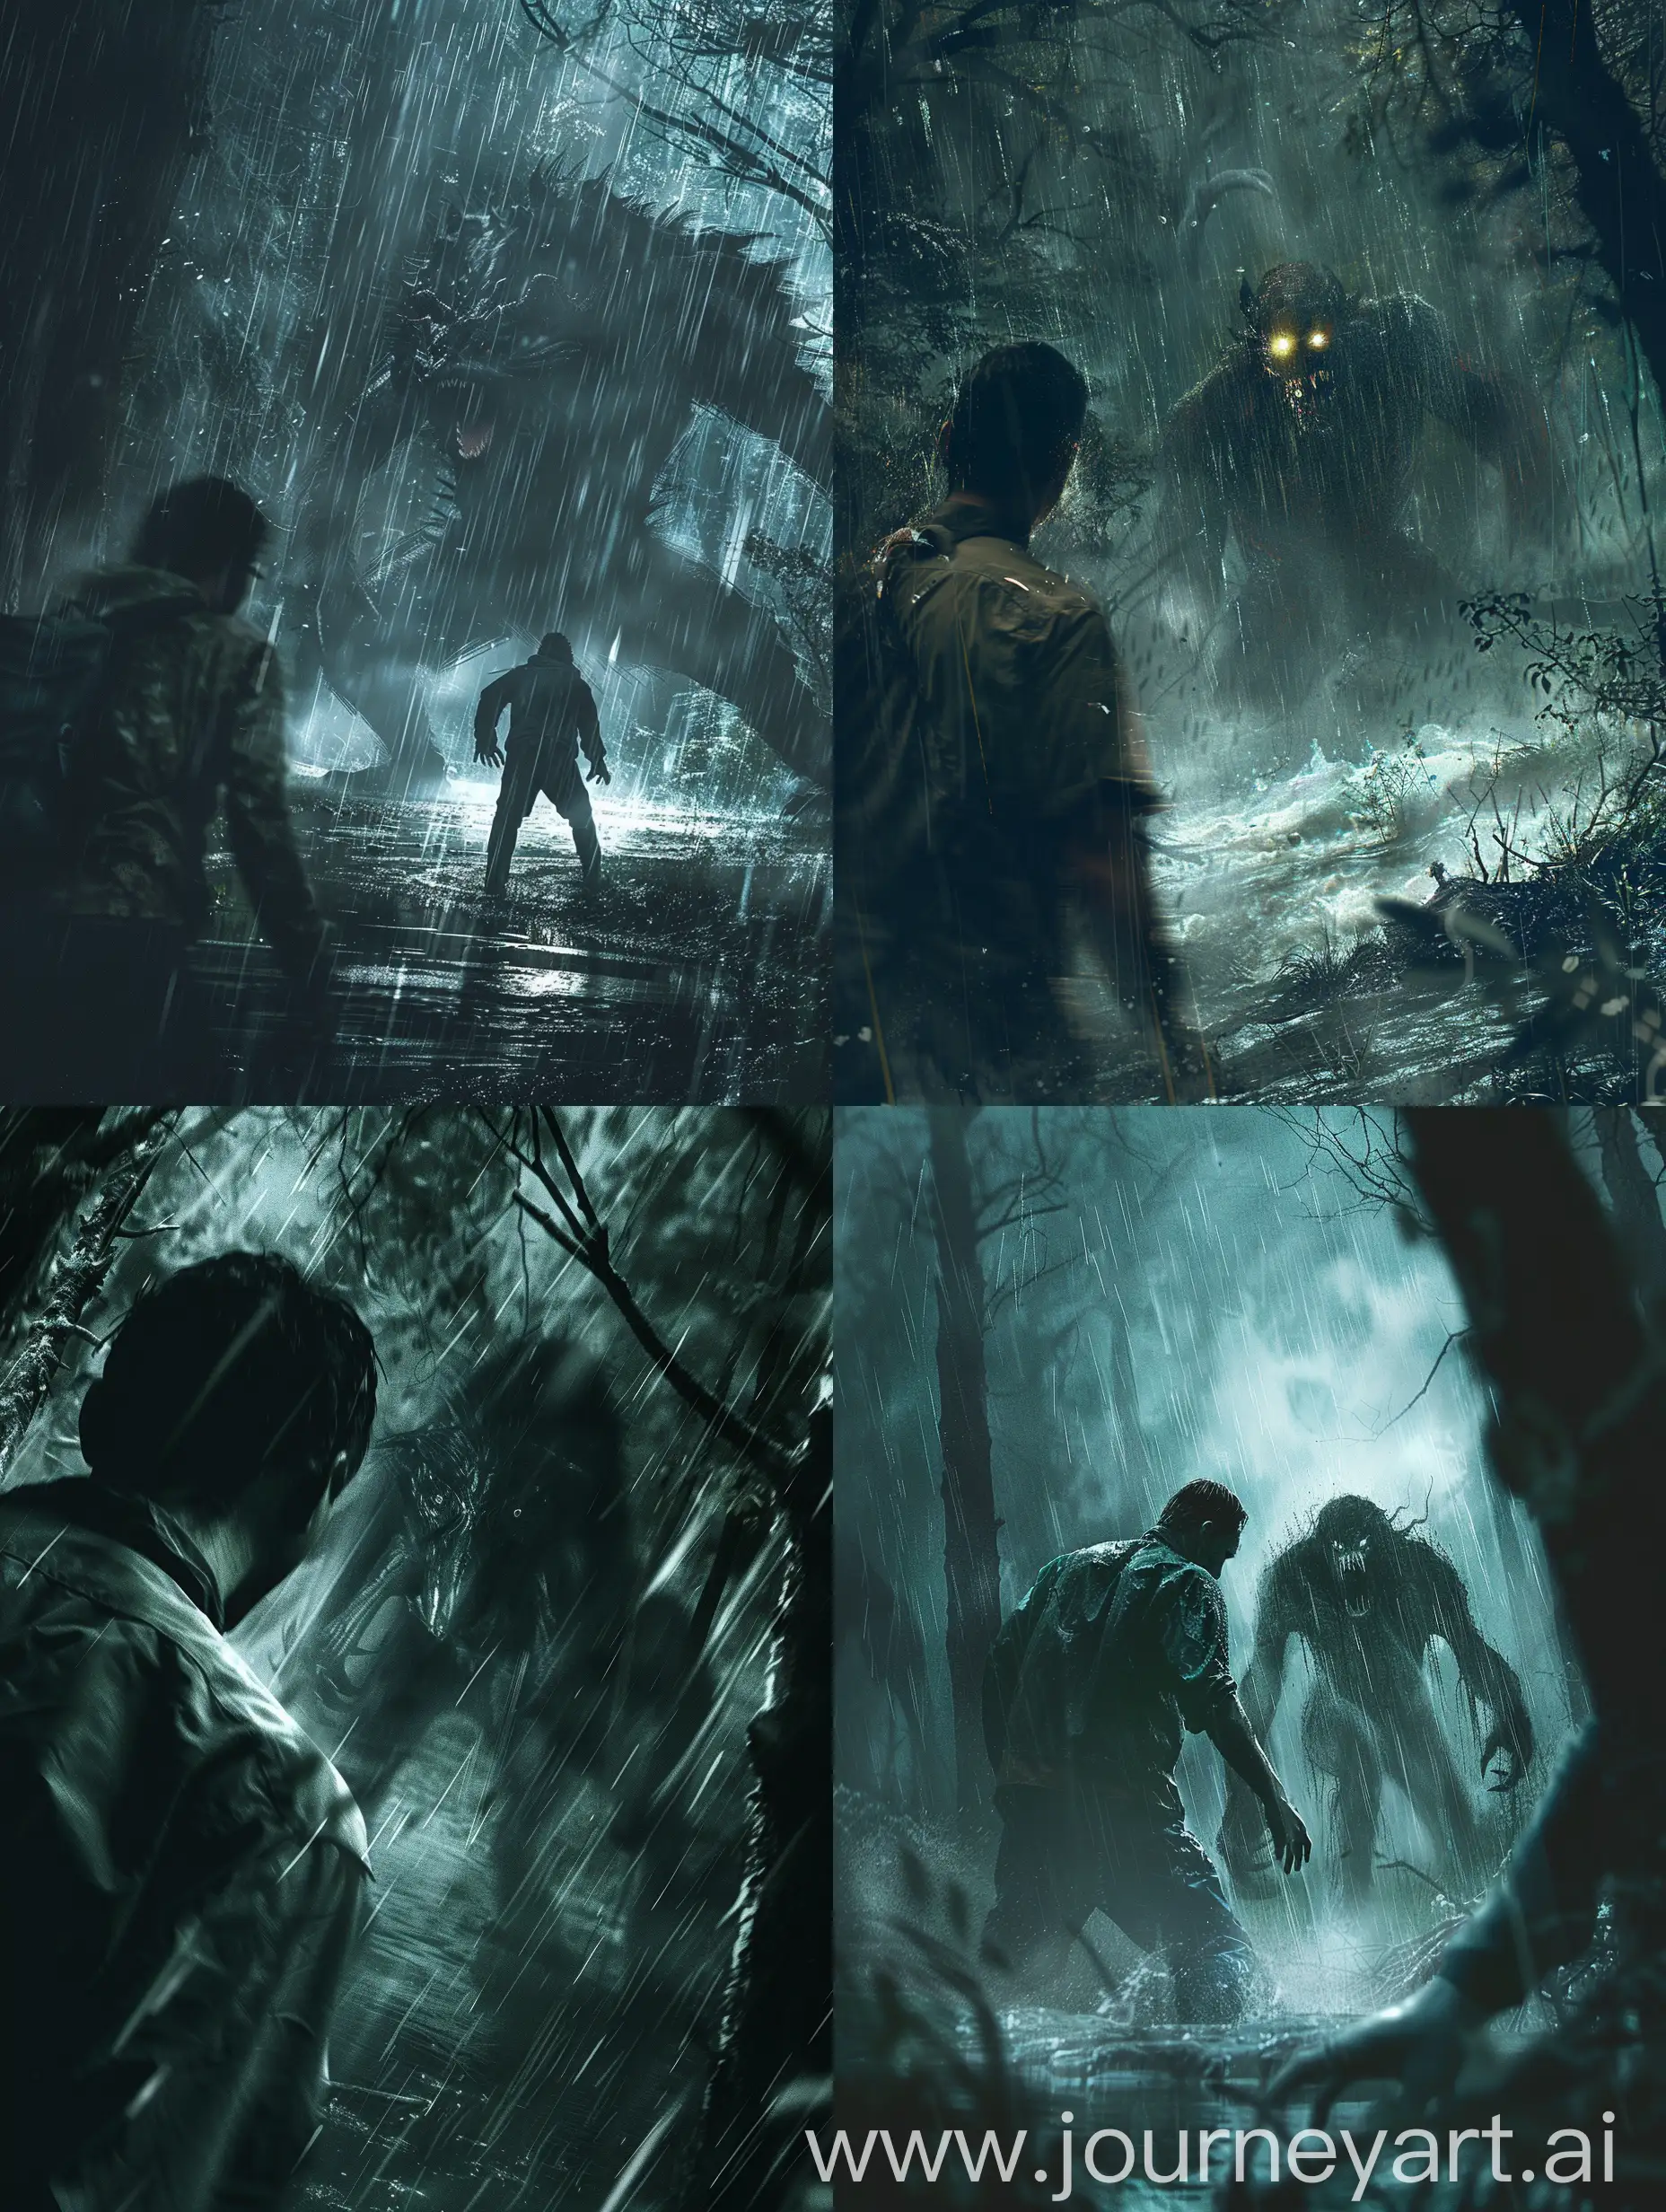 Man-in-Dark-Rainy-Forest-Encounters-Sinister-Creature